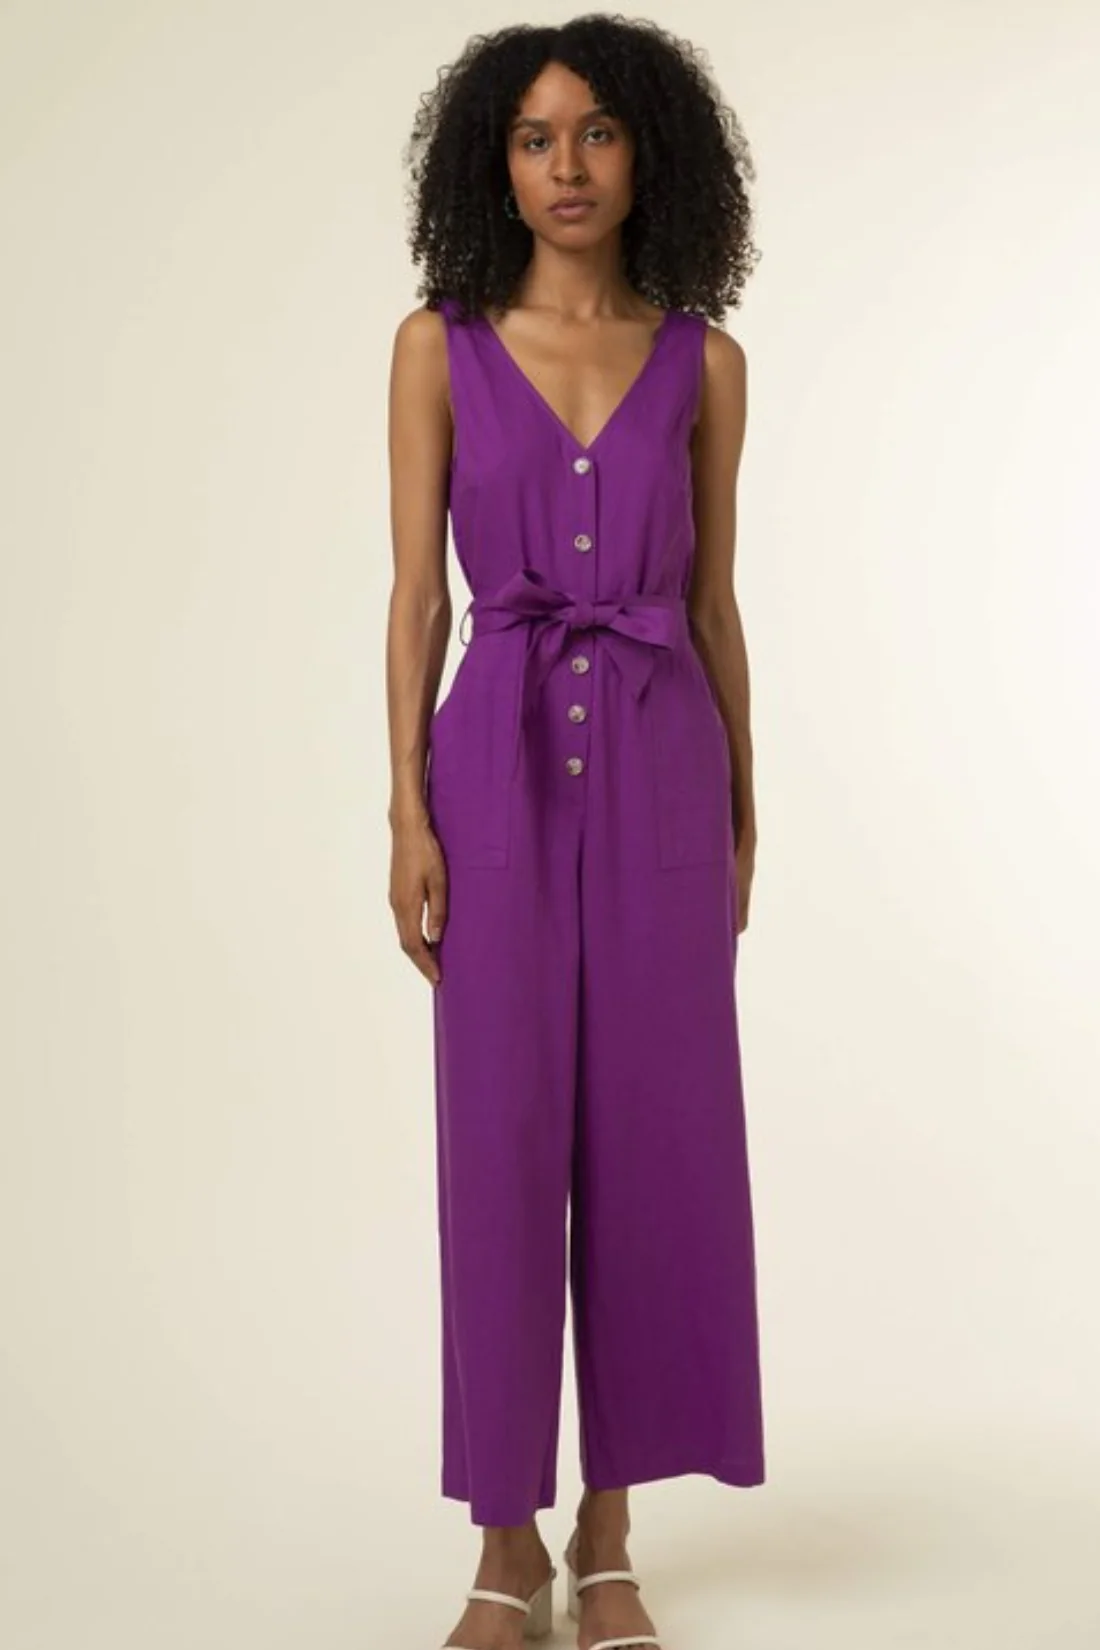 rompers come in many colors, styles and fabrics